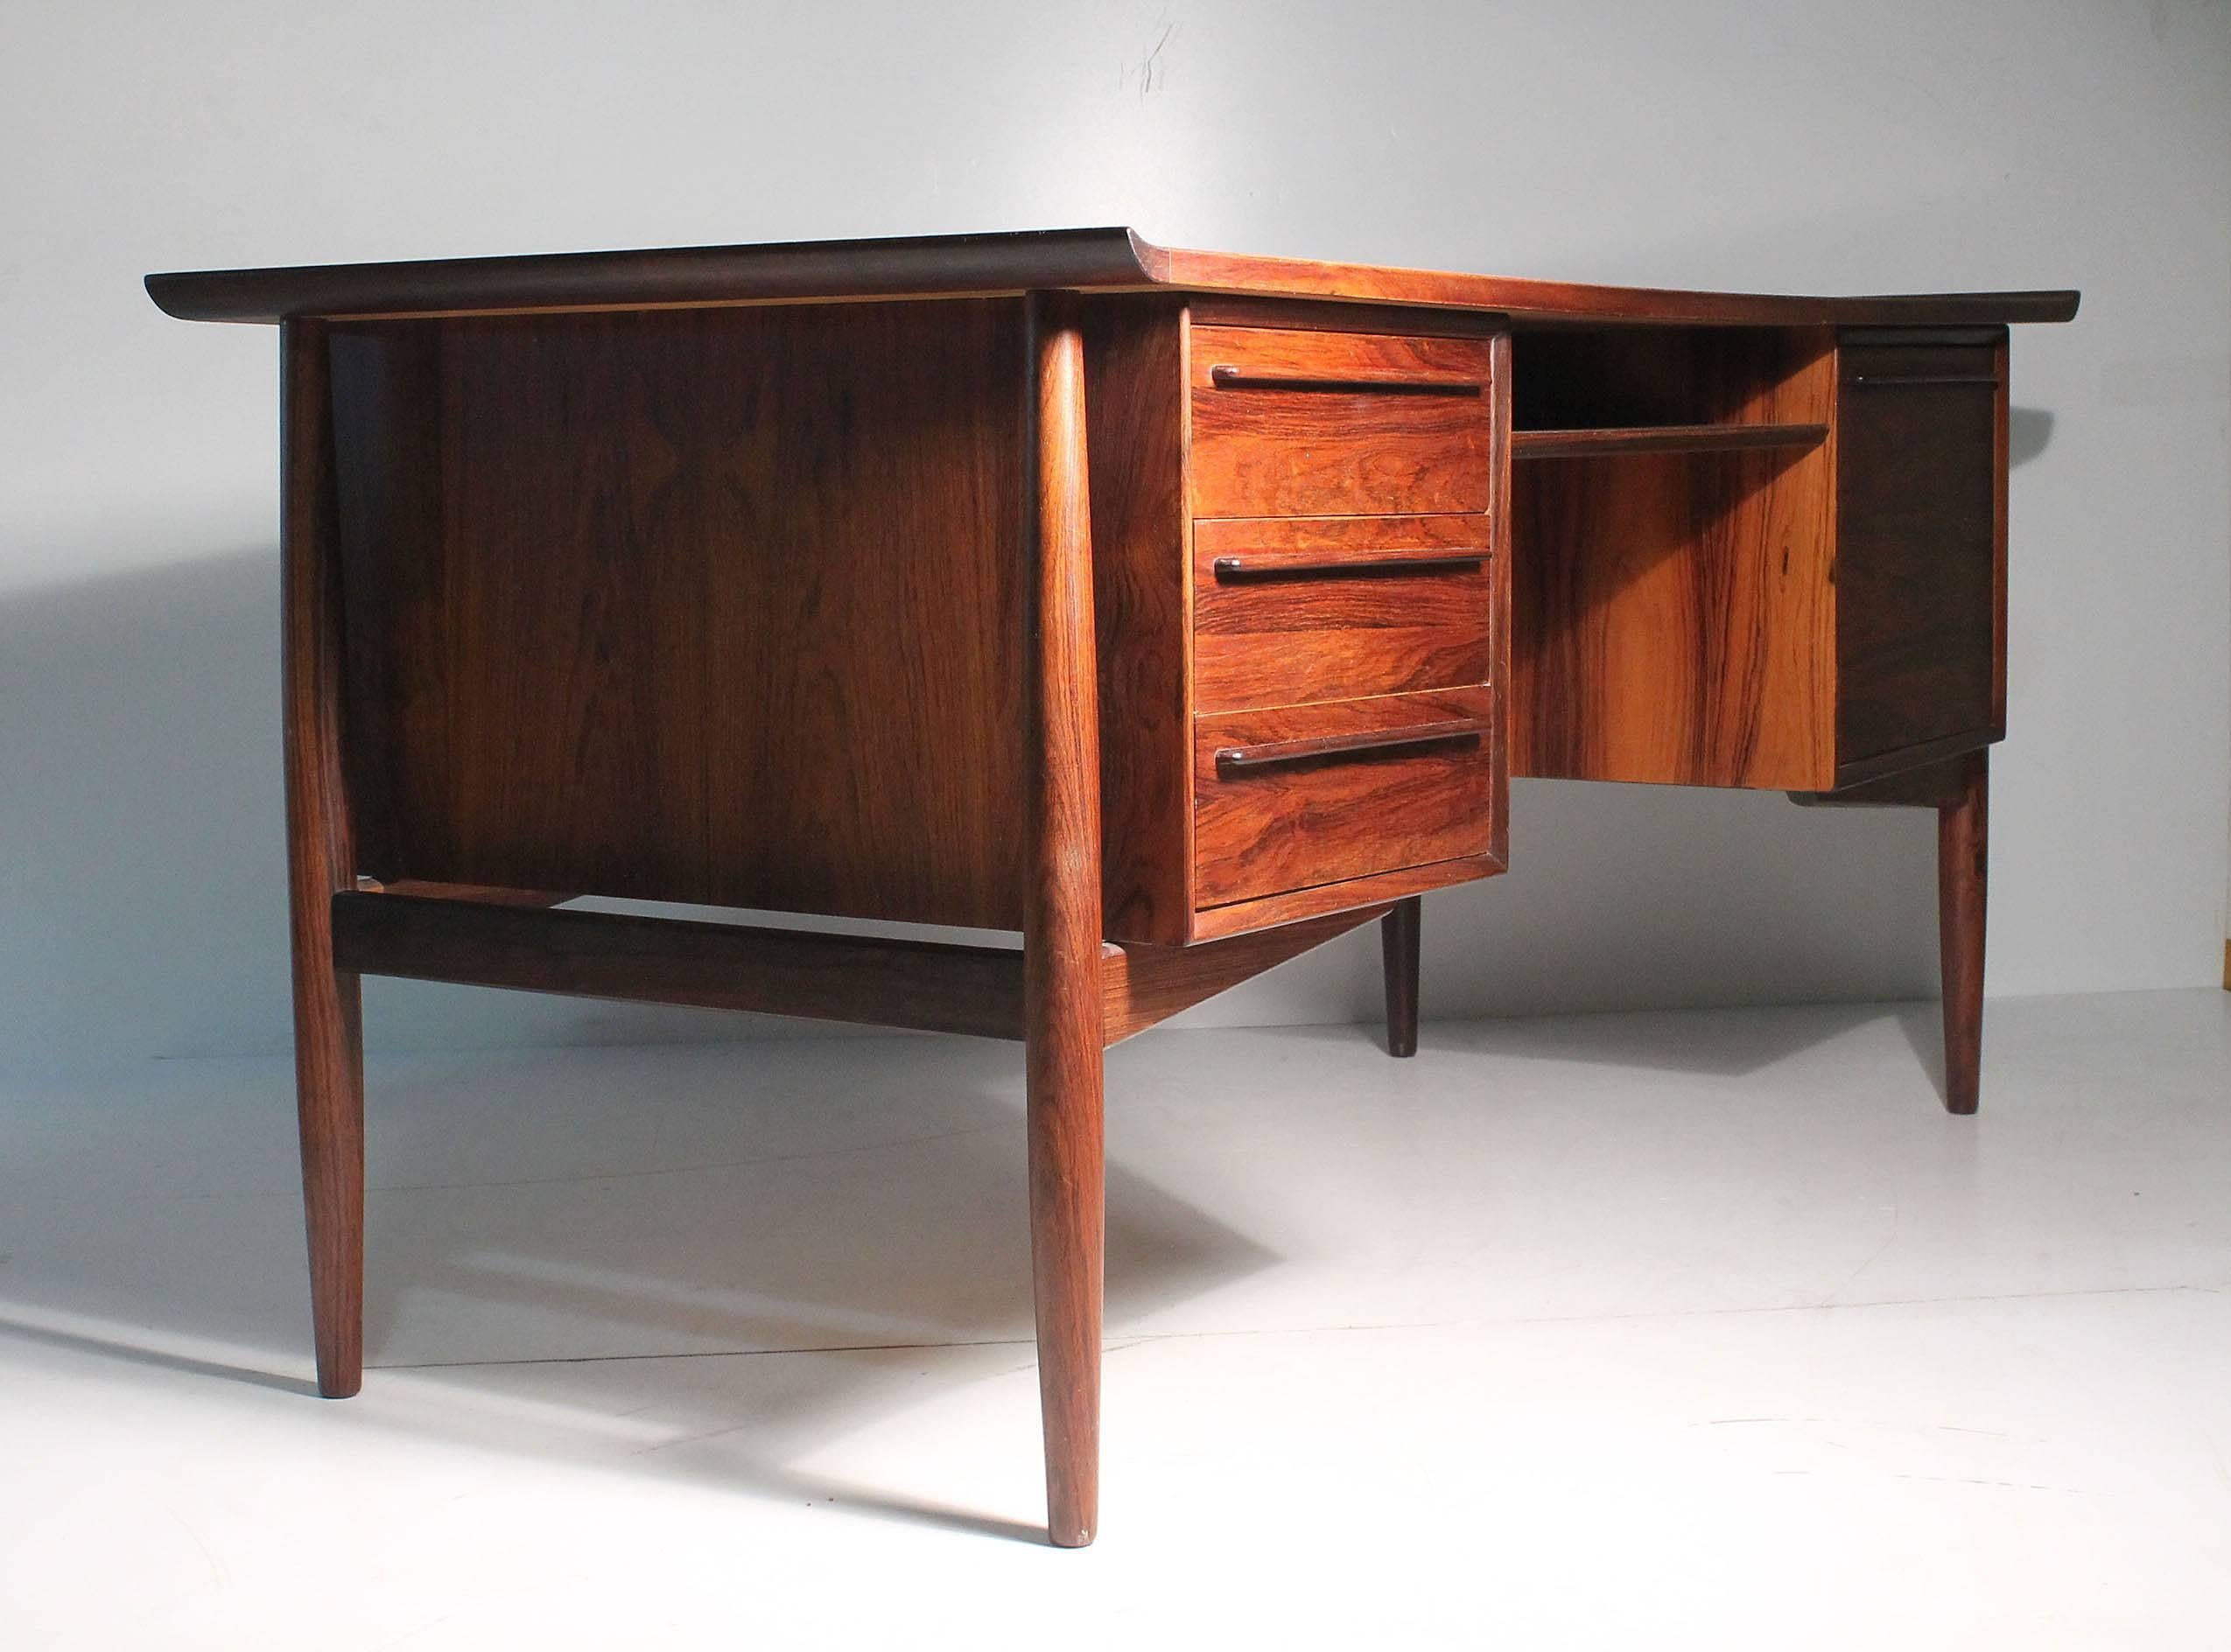 Exceptional Arne Vodder rosewood executive desk.

Comes with one adjustable and removable rosewood shelf to be inserted on backside space (not photographed).